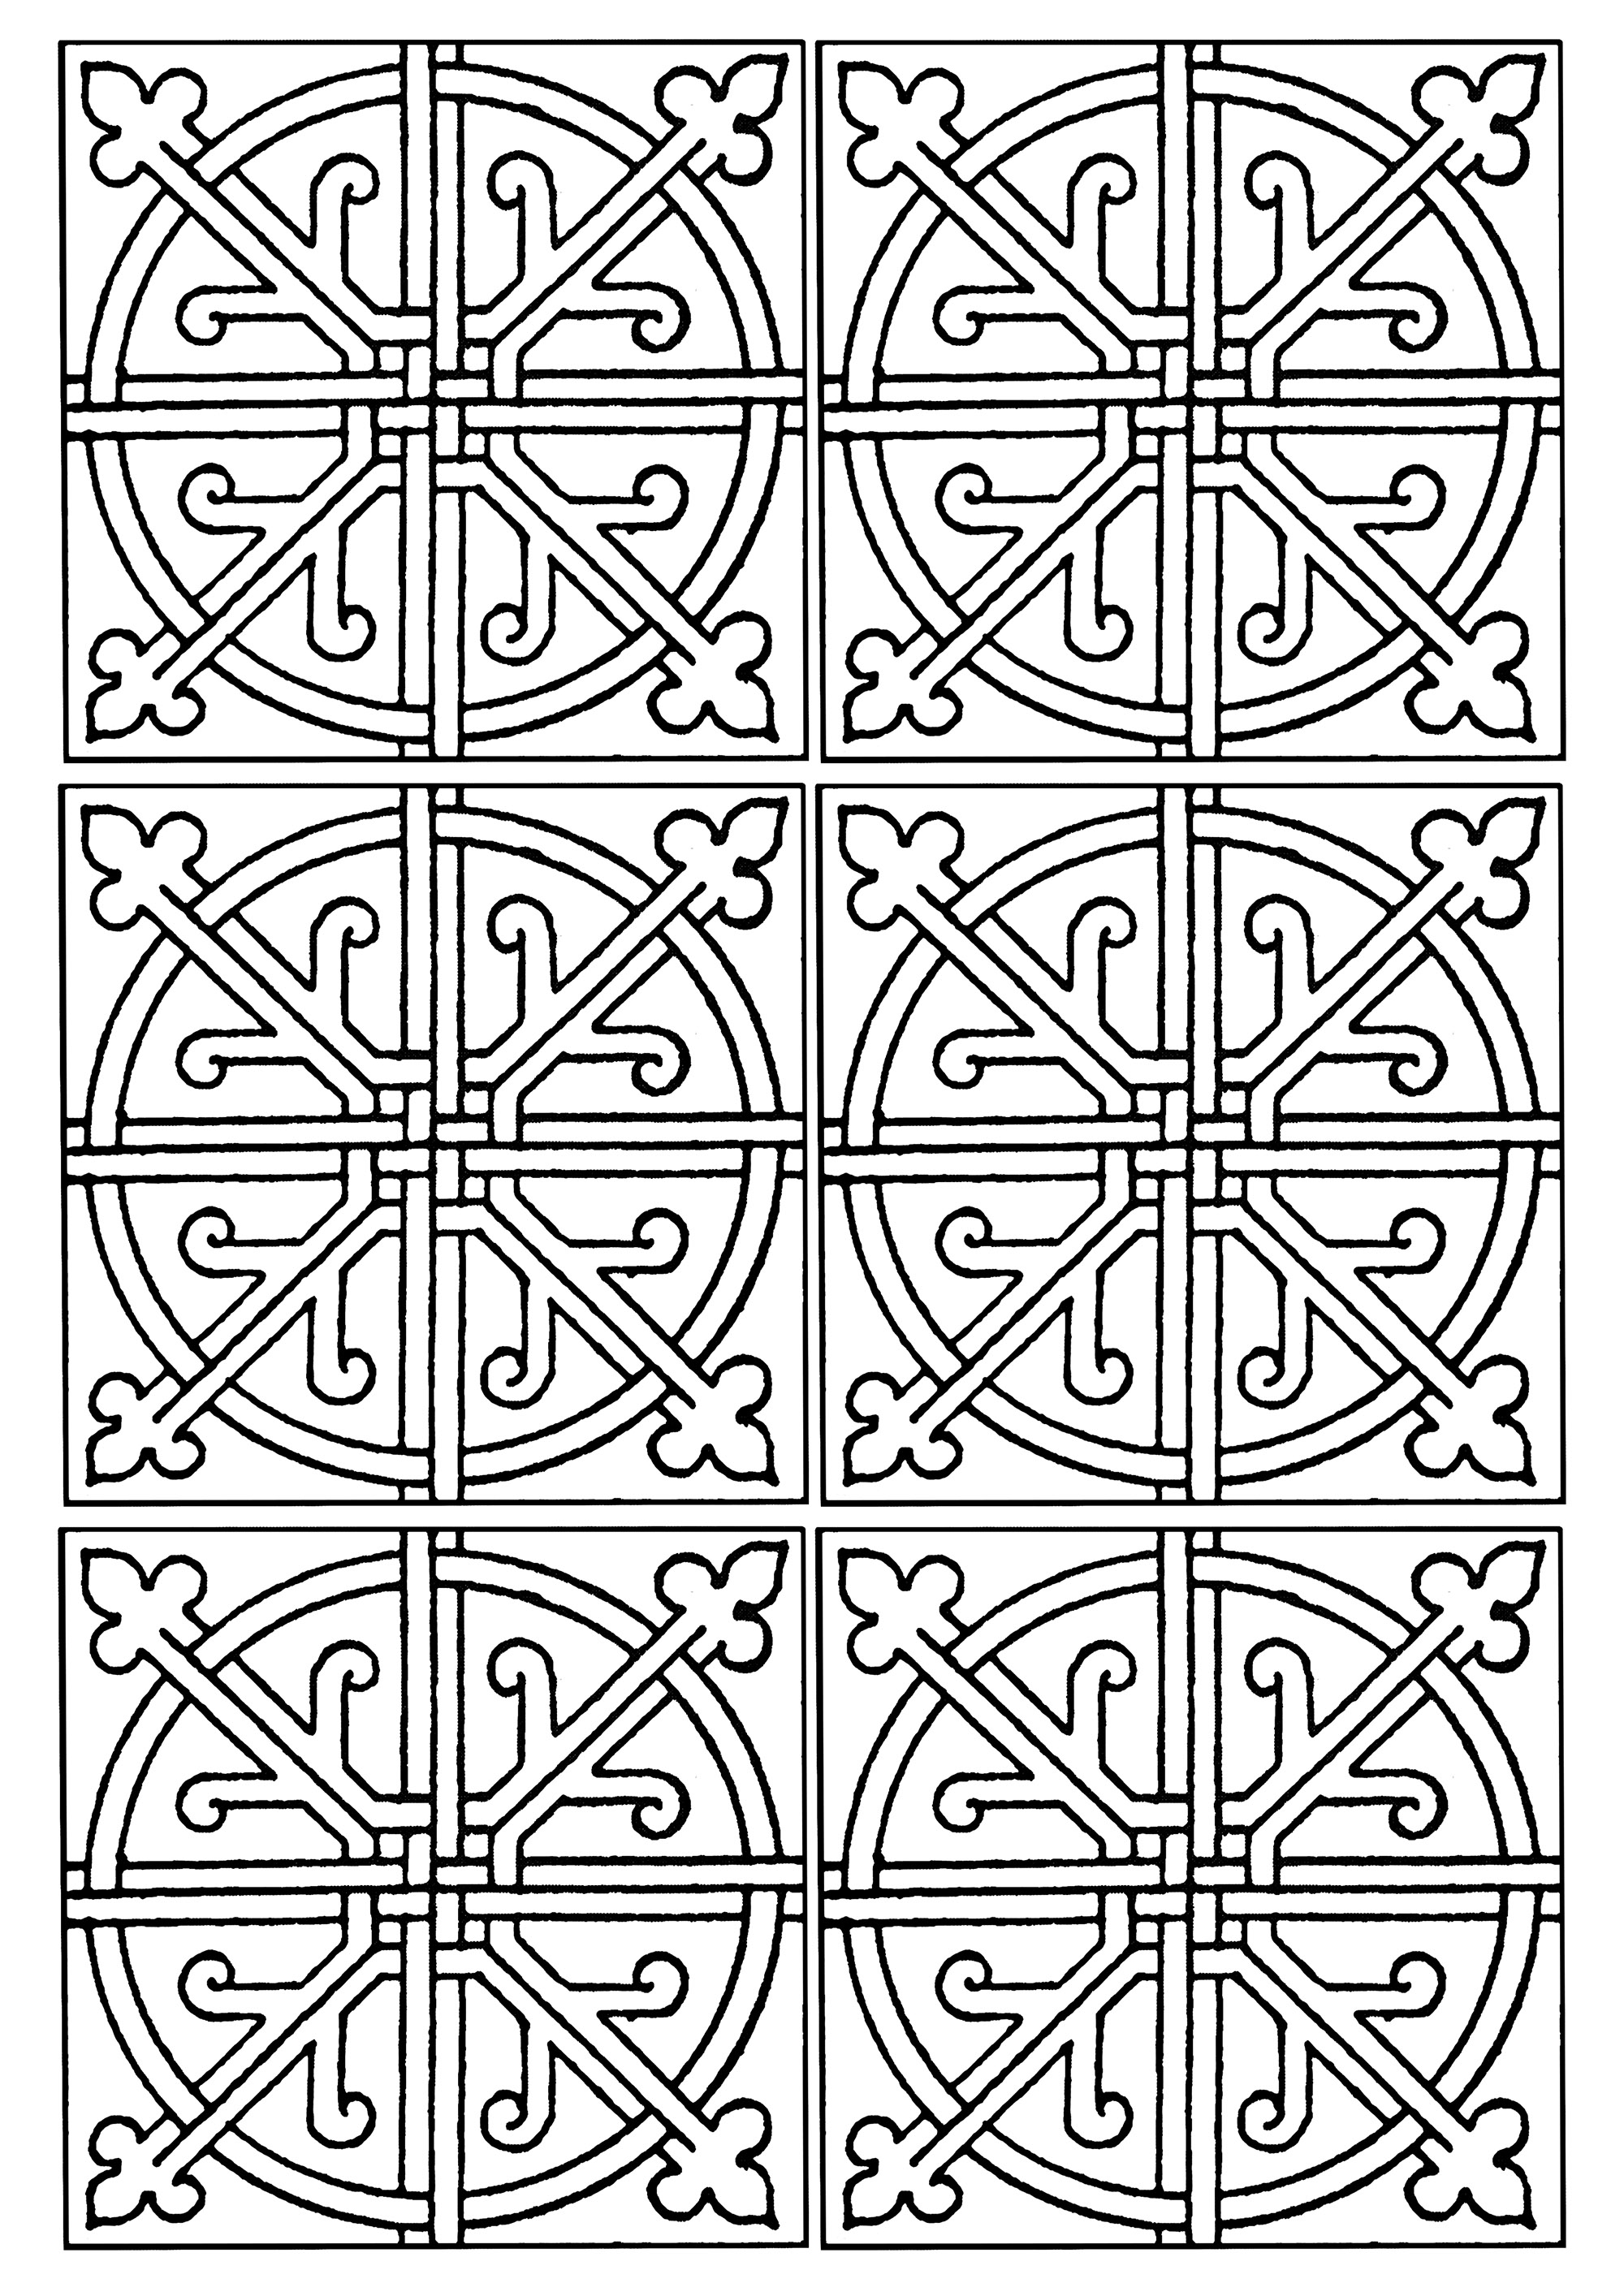 A series of 6 azulejos. 6 azulejos in simple shapes. It's up to you to color them, either identically or with different colors.